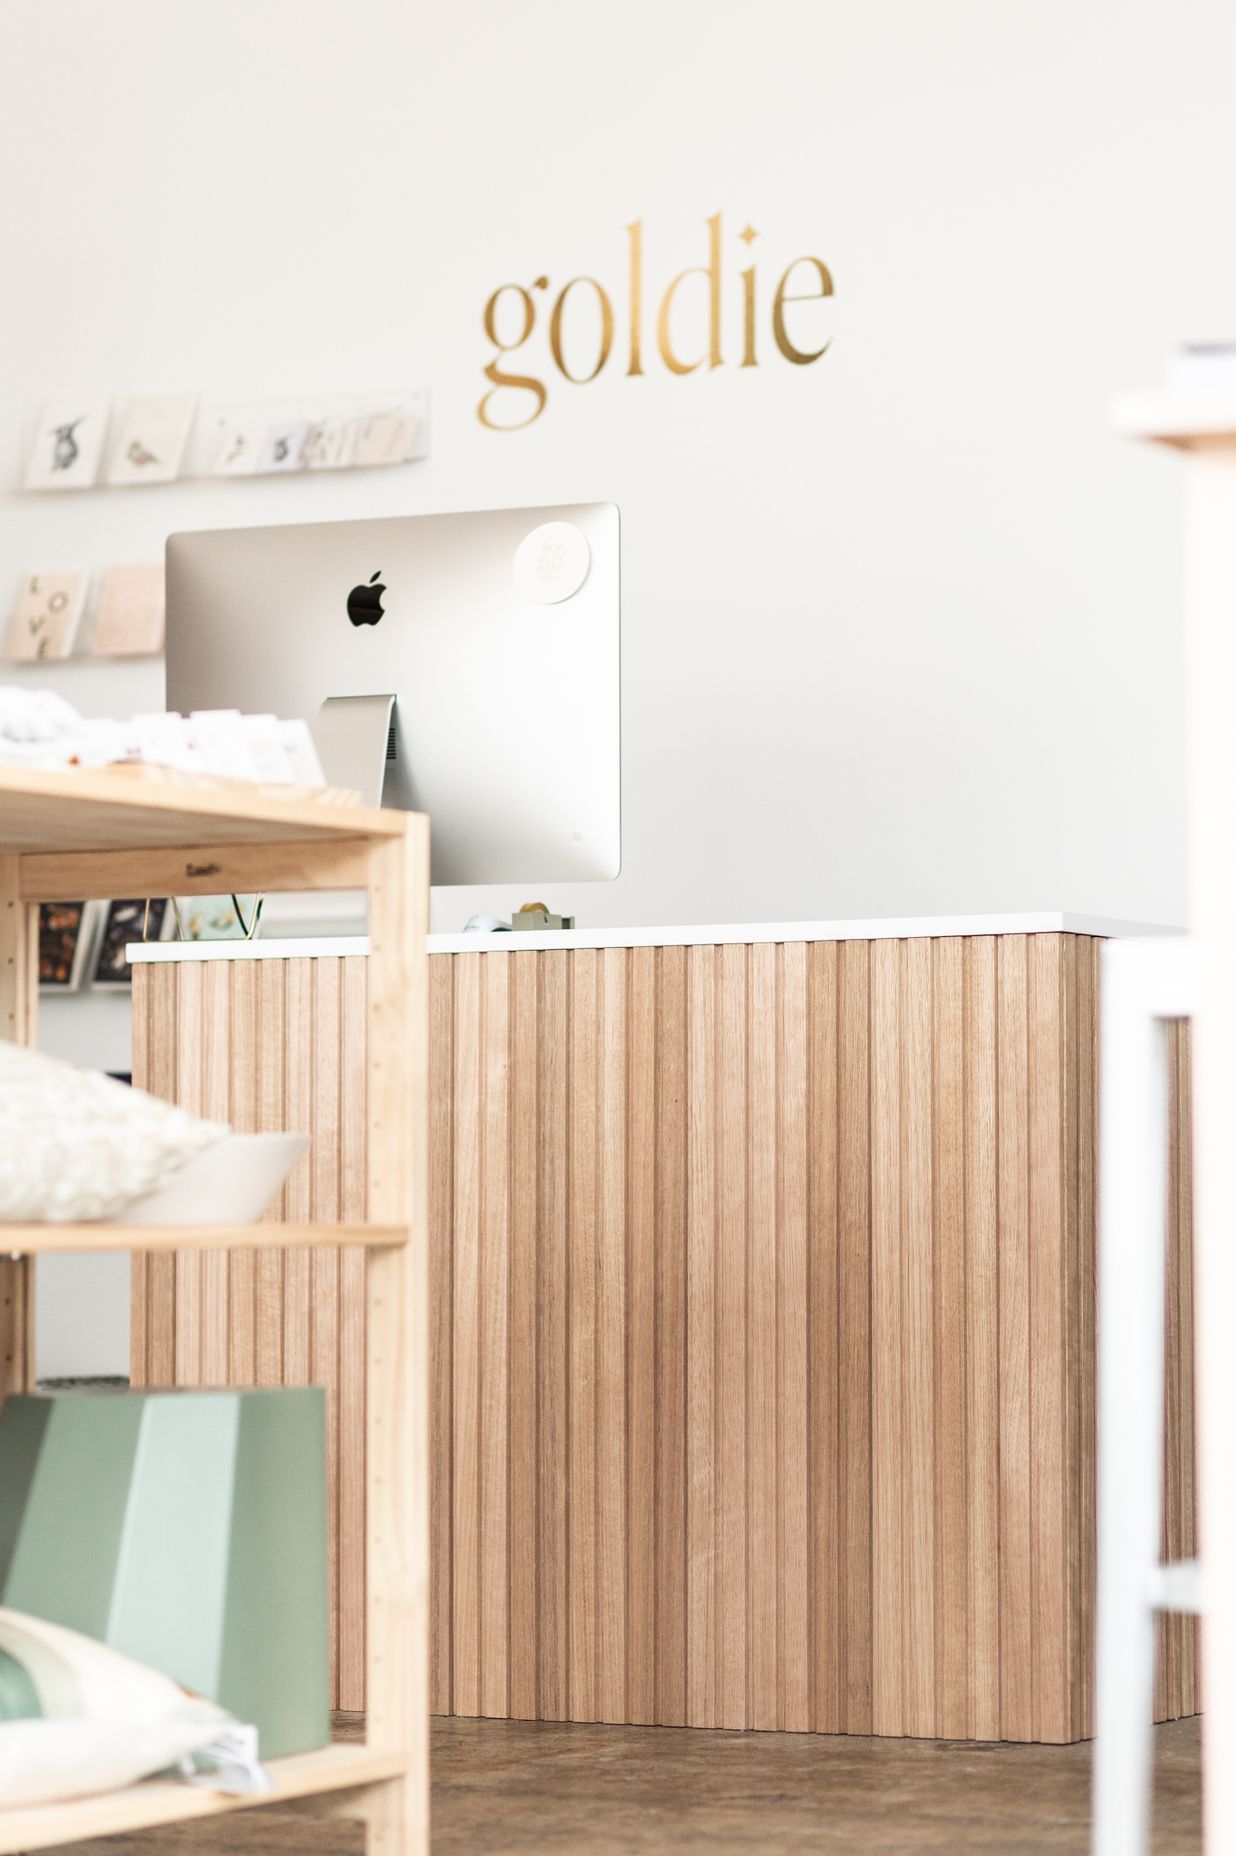 Goldie Home Store, Eastbourne